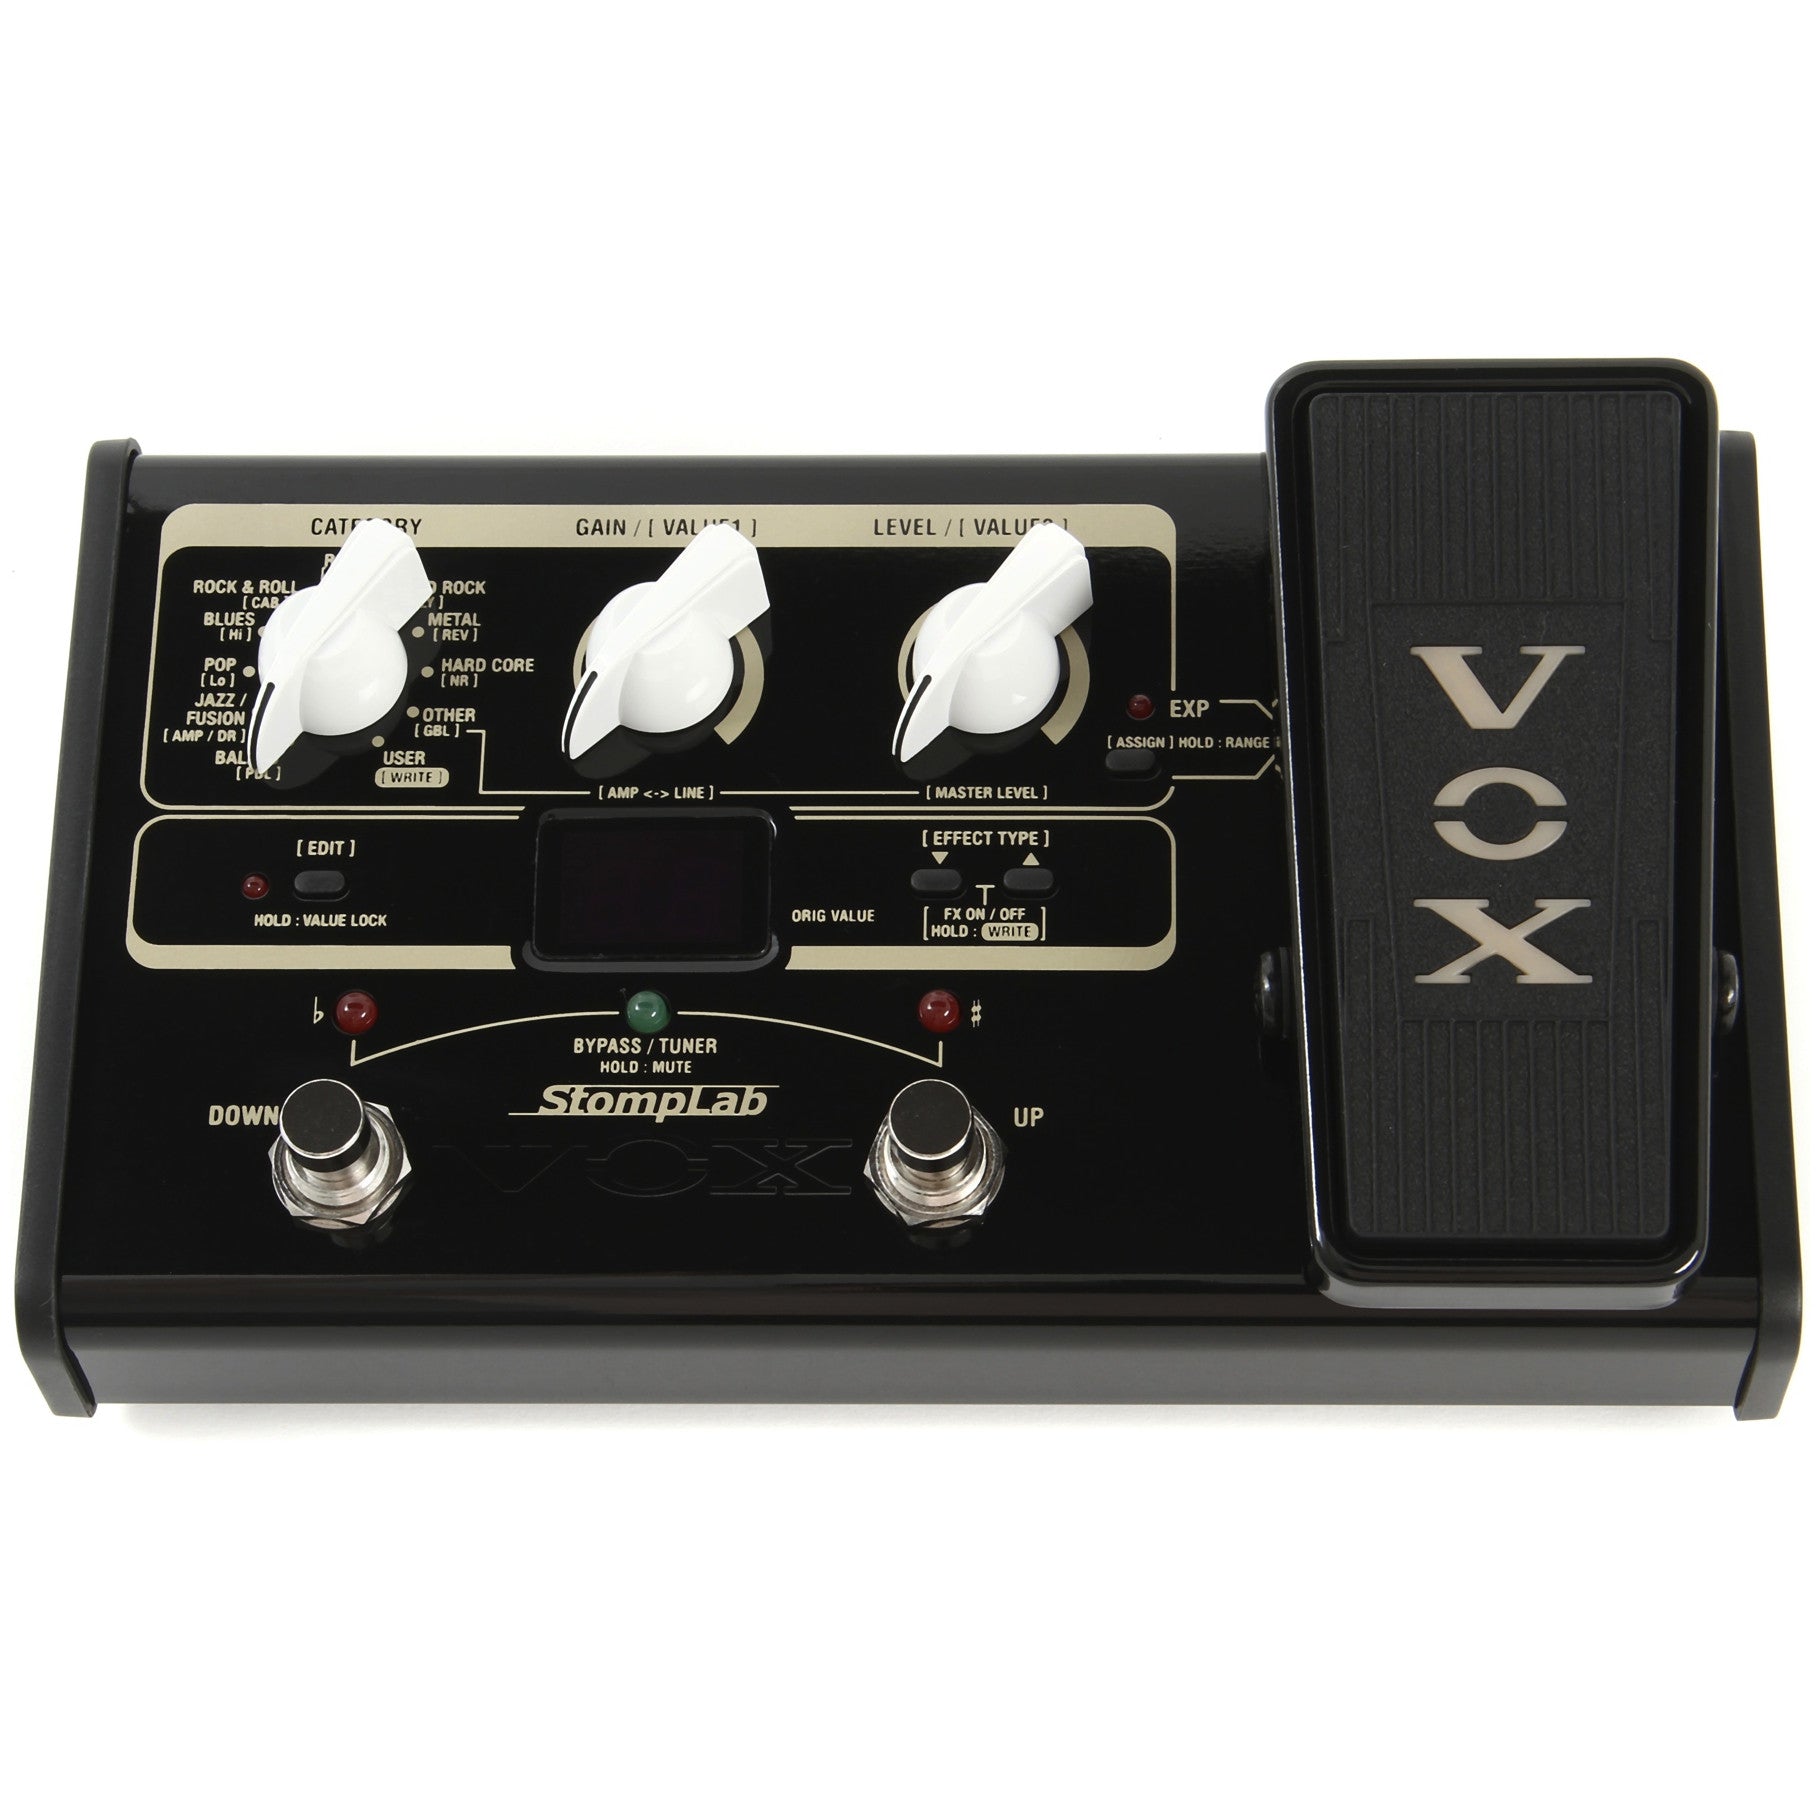 Vox Stomplab IIG Modeling Effects